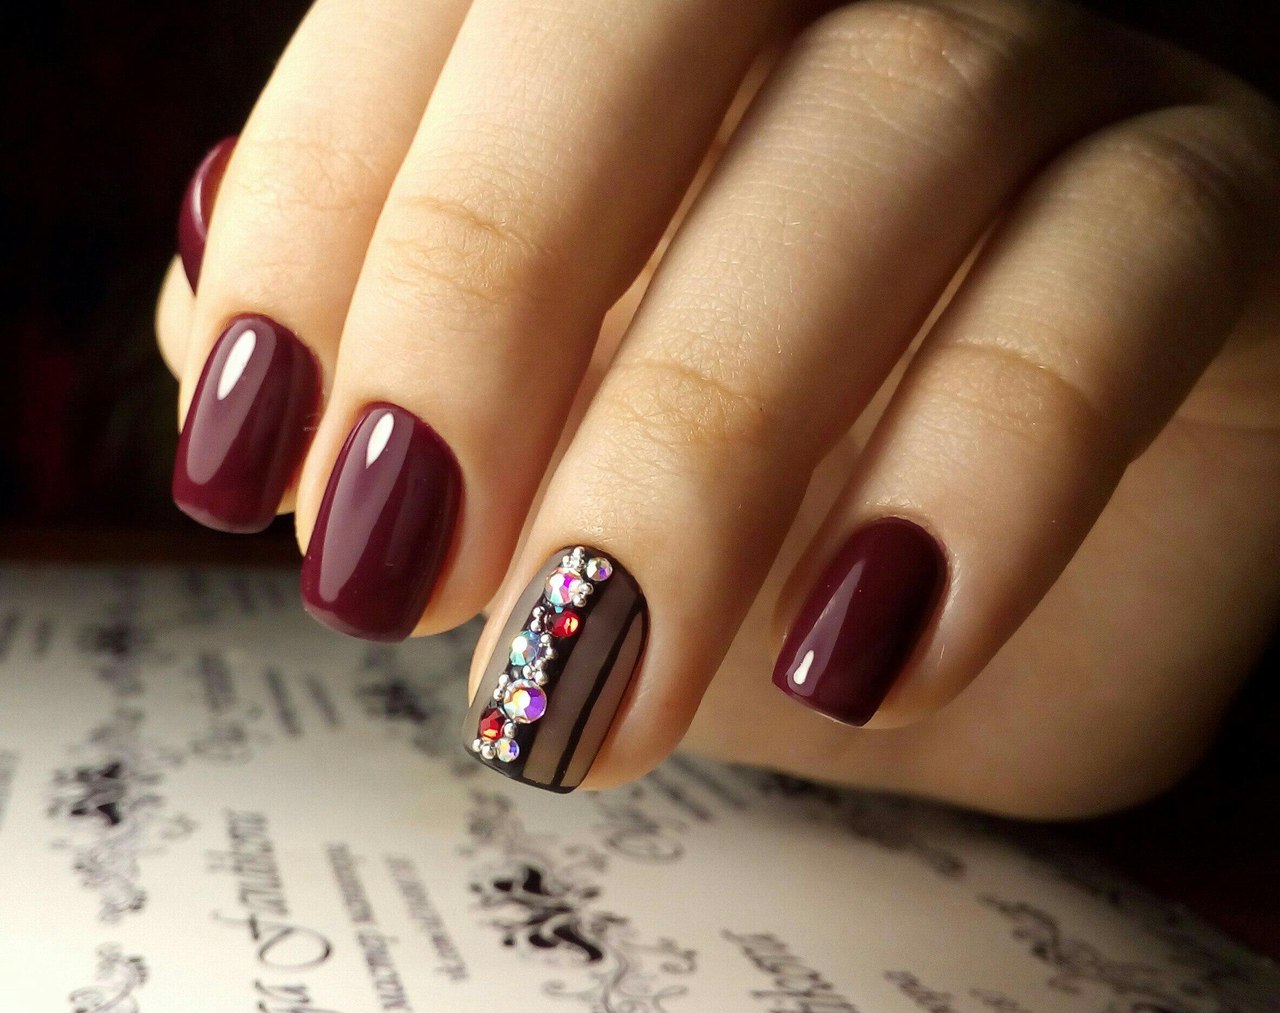 1. Long-Lasting Nail Art That Grows Out Well - wide 5